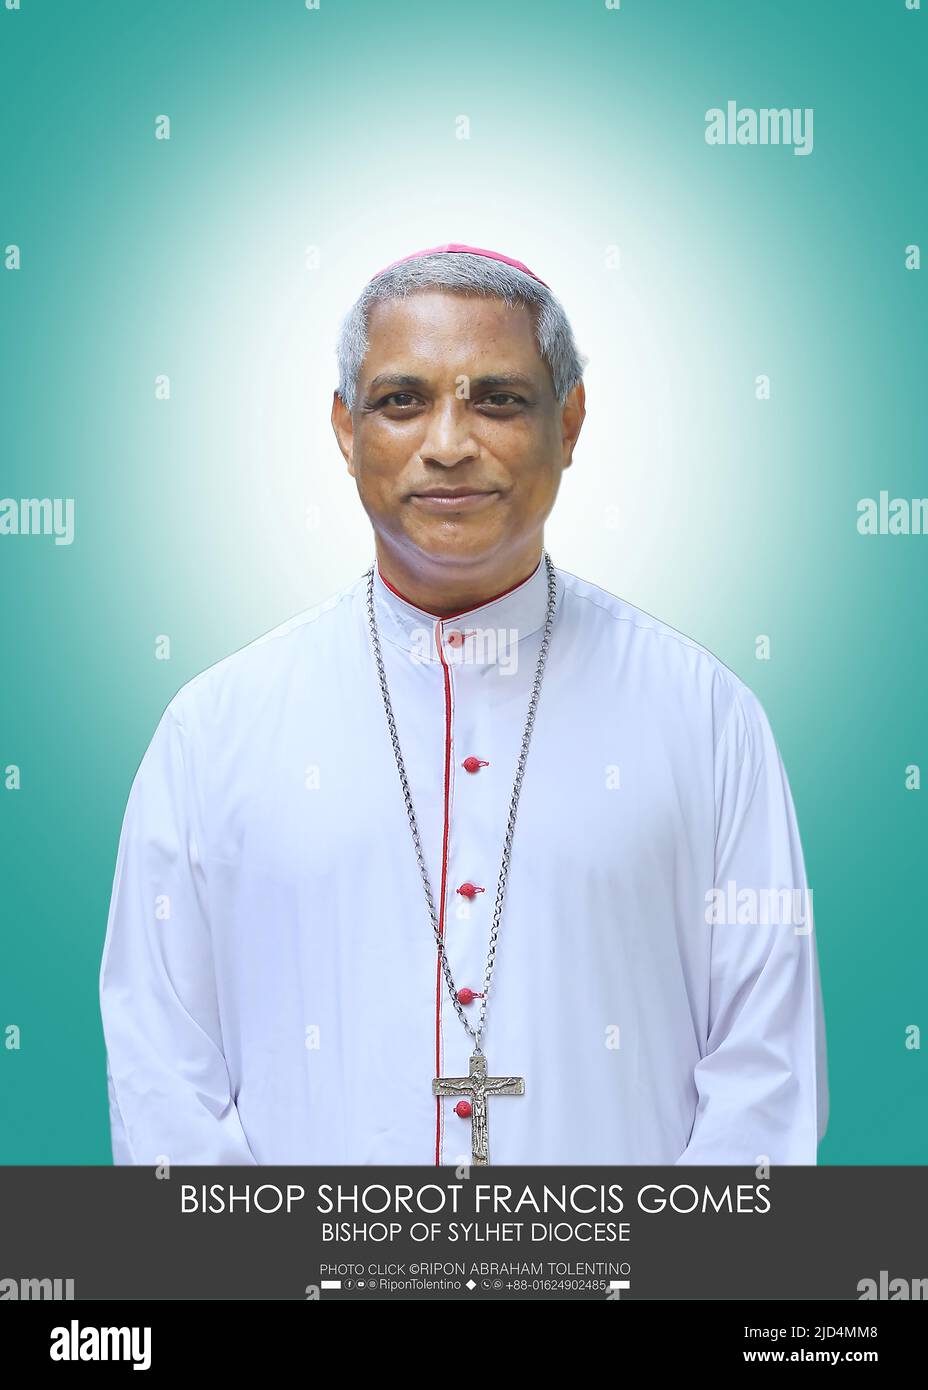 Pictures of all Bangladeshi bishops. These pictures were taken on the golden jubilee of CBCB.Catholic Bishops' Conference of Bangladesh, Photo Credit: Stock Photo